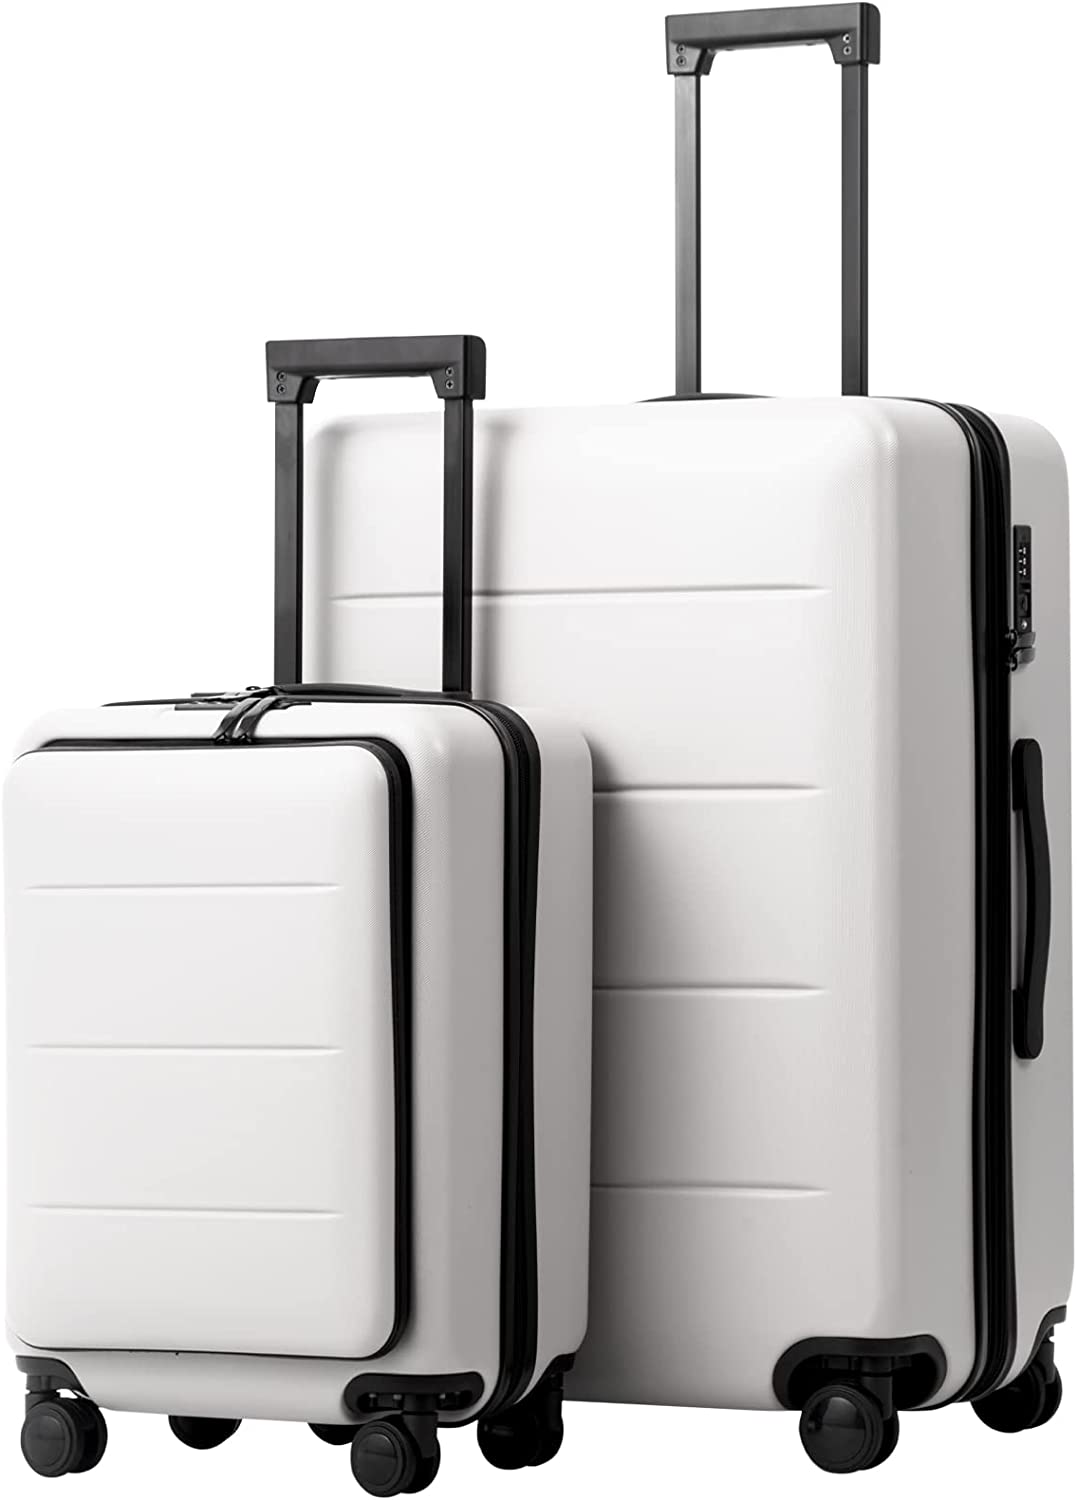 A set of lightweight suitcases.